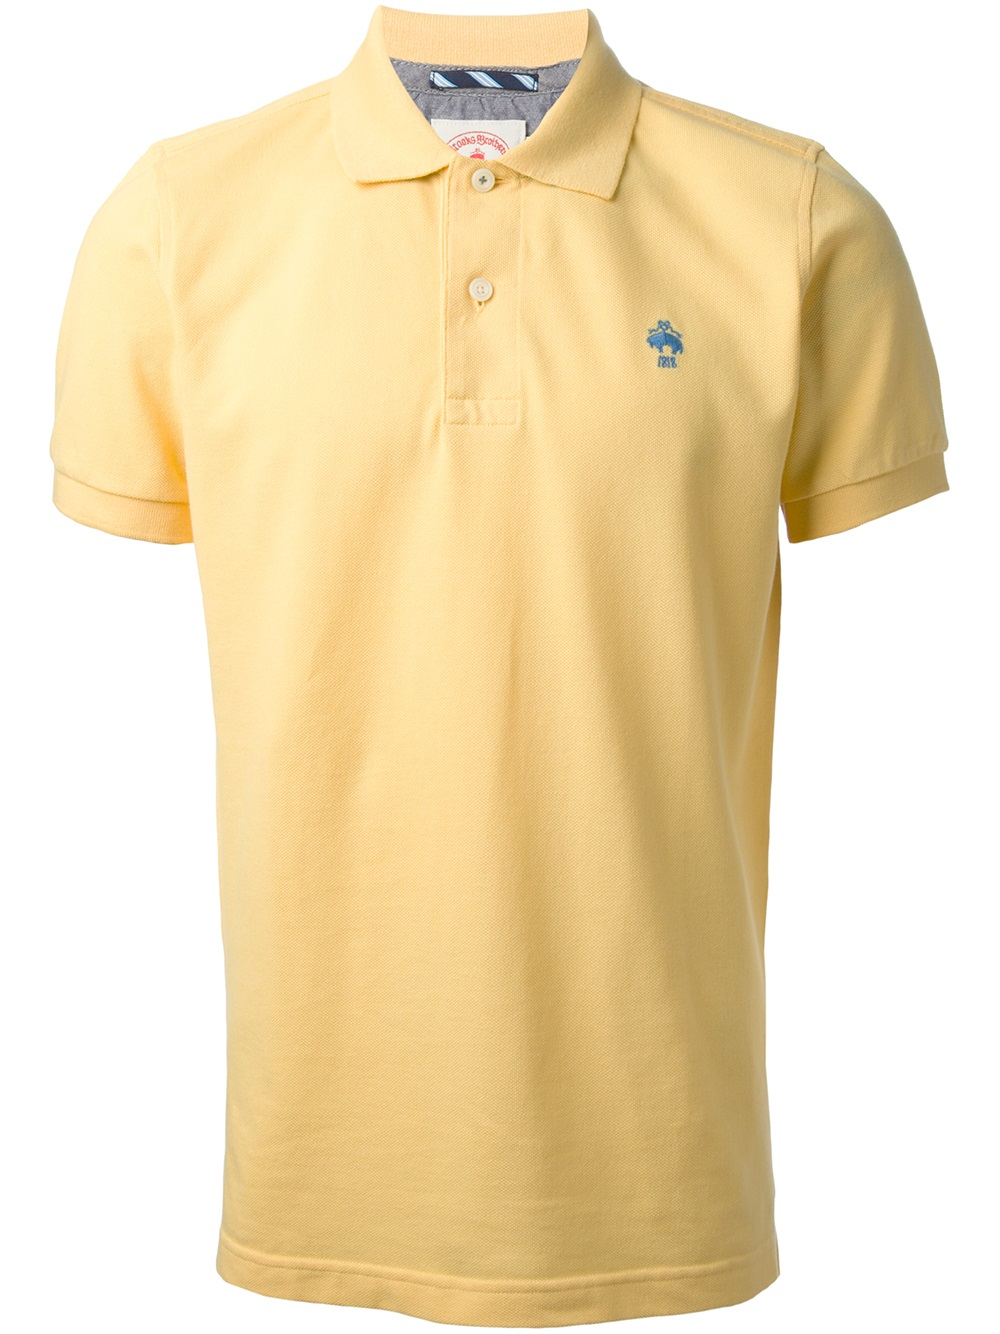 Lyst - Brooks Brothers Polo Shirt in Yellow for Men